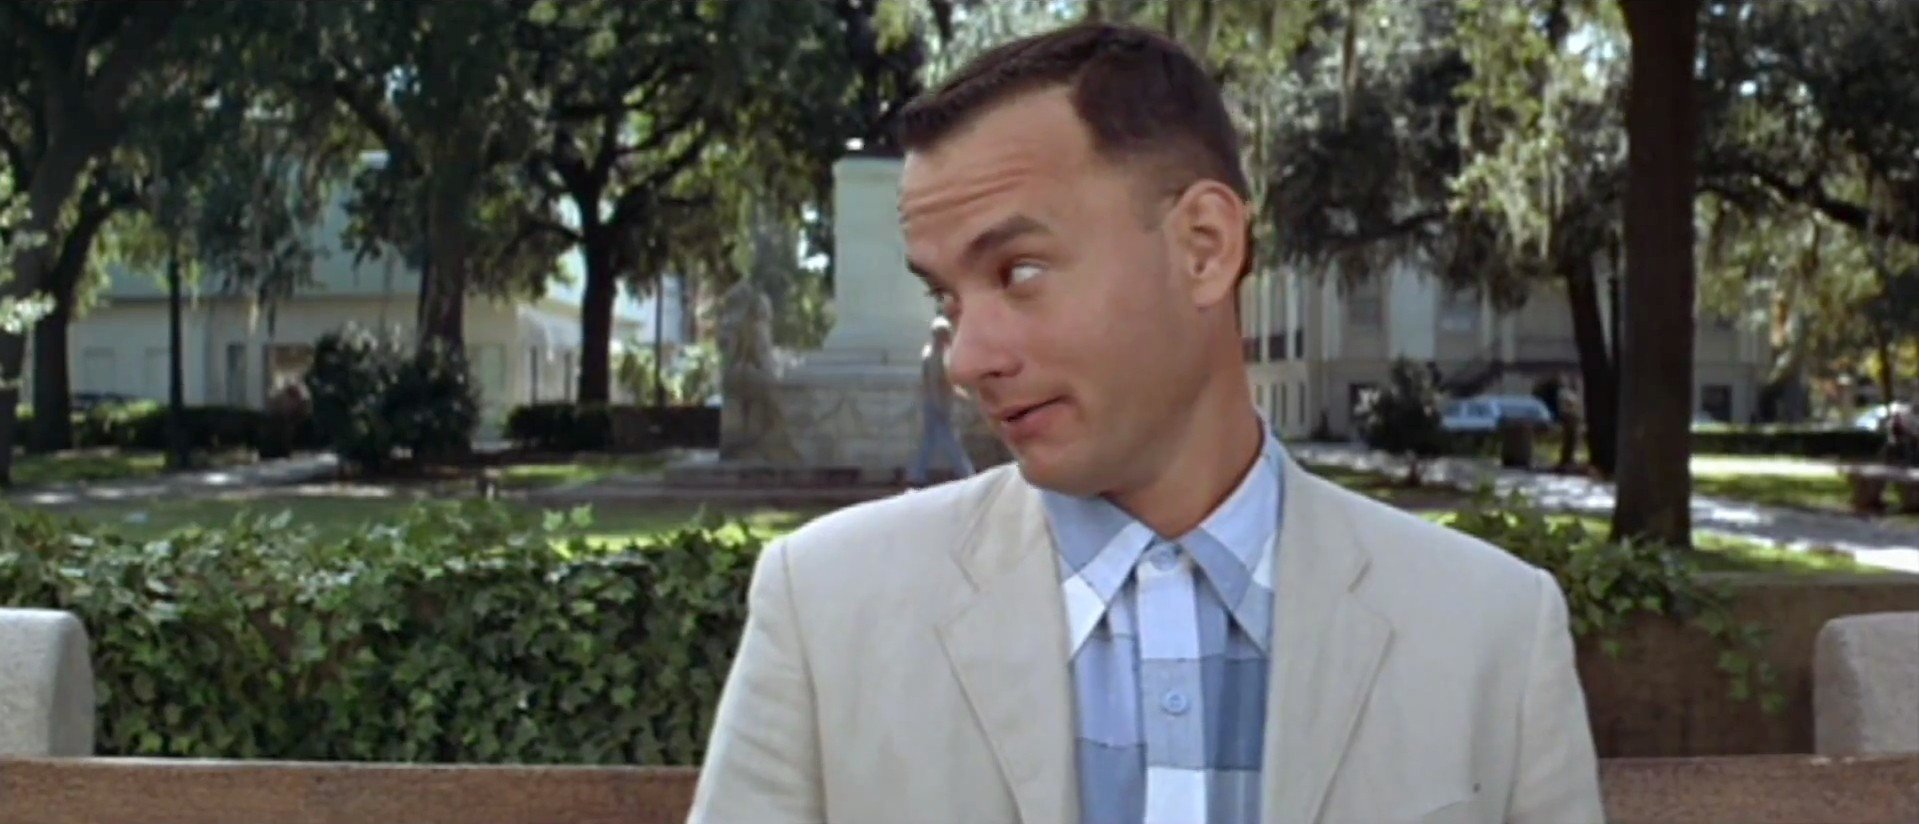 summer movies ranked, forrest gump 1994